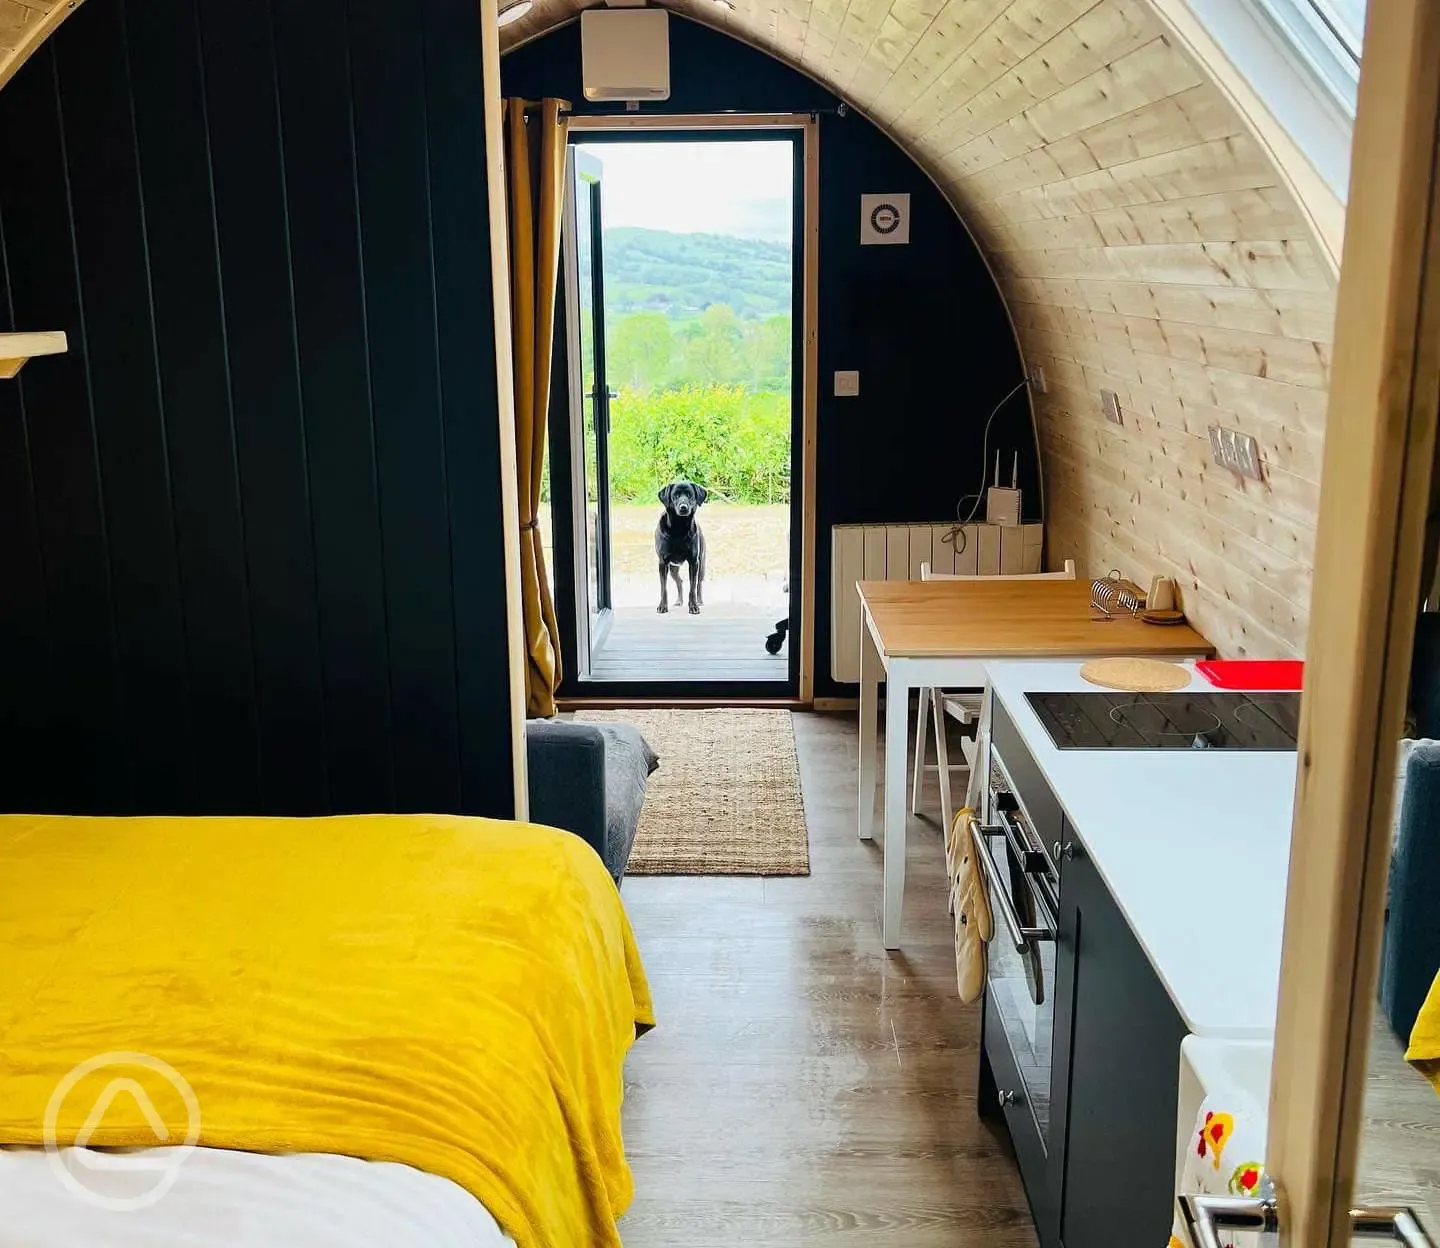 View from inside the glamping pod